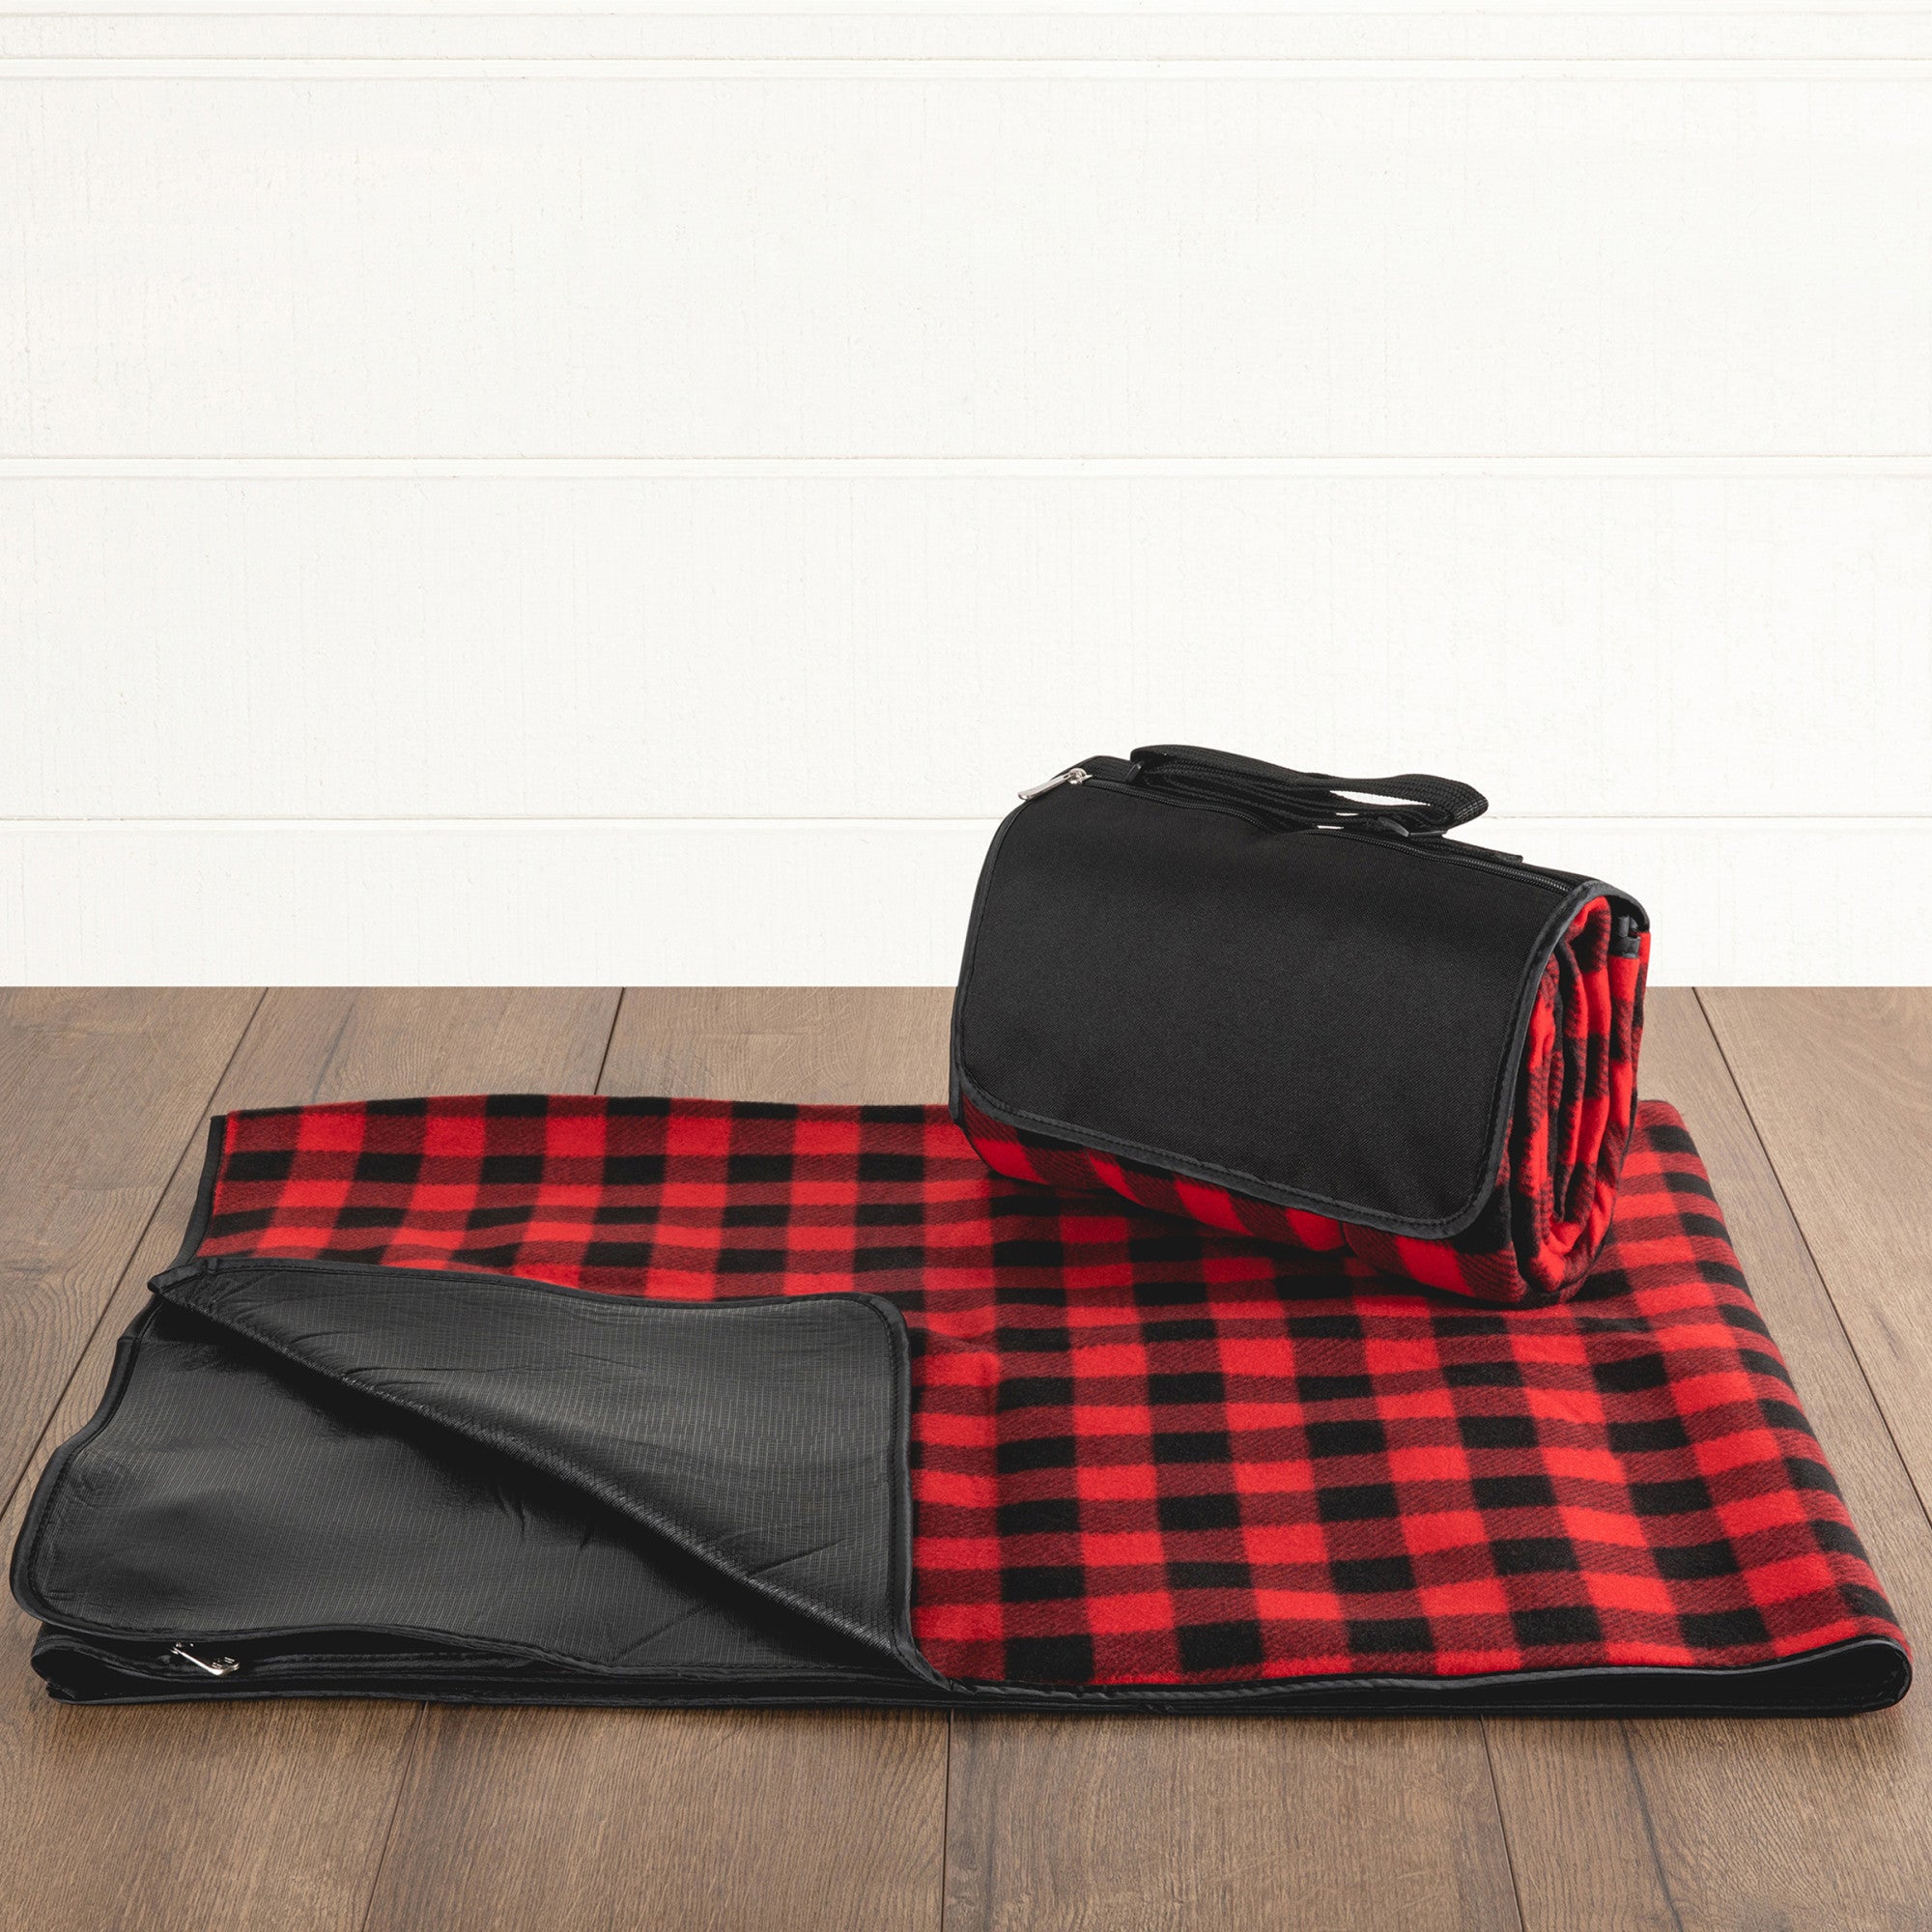 Checkered Insulated Lunch Bag, Waterproof Picnic Bag, Ice Bag